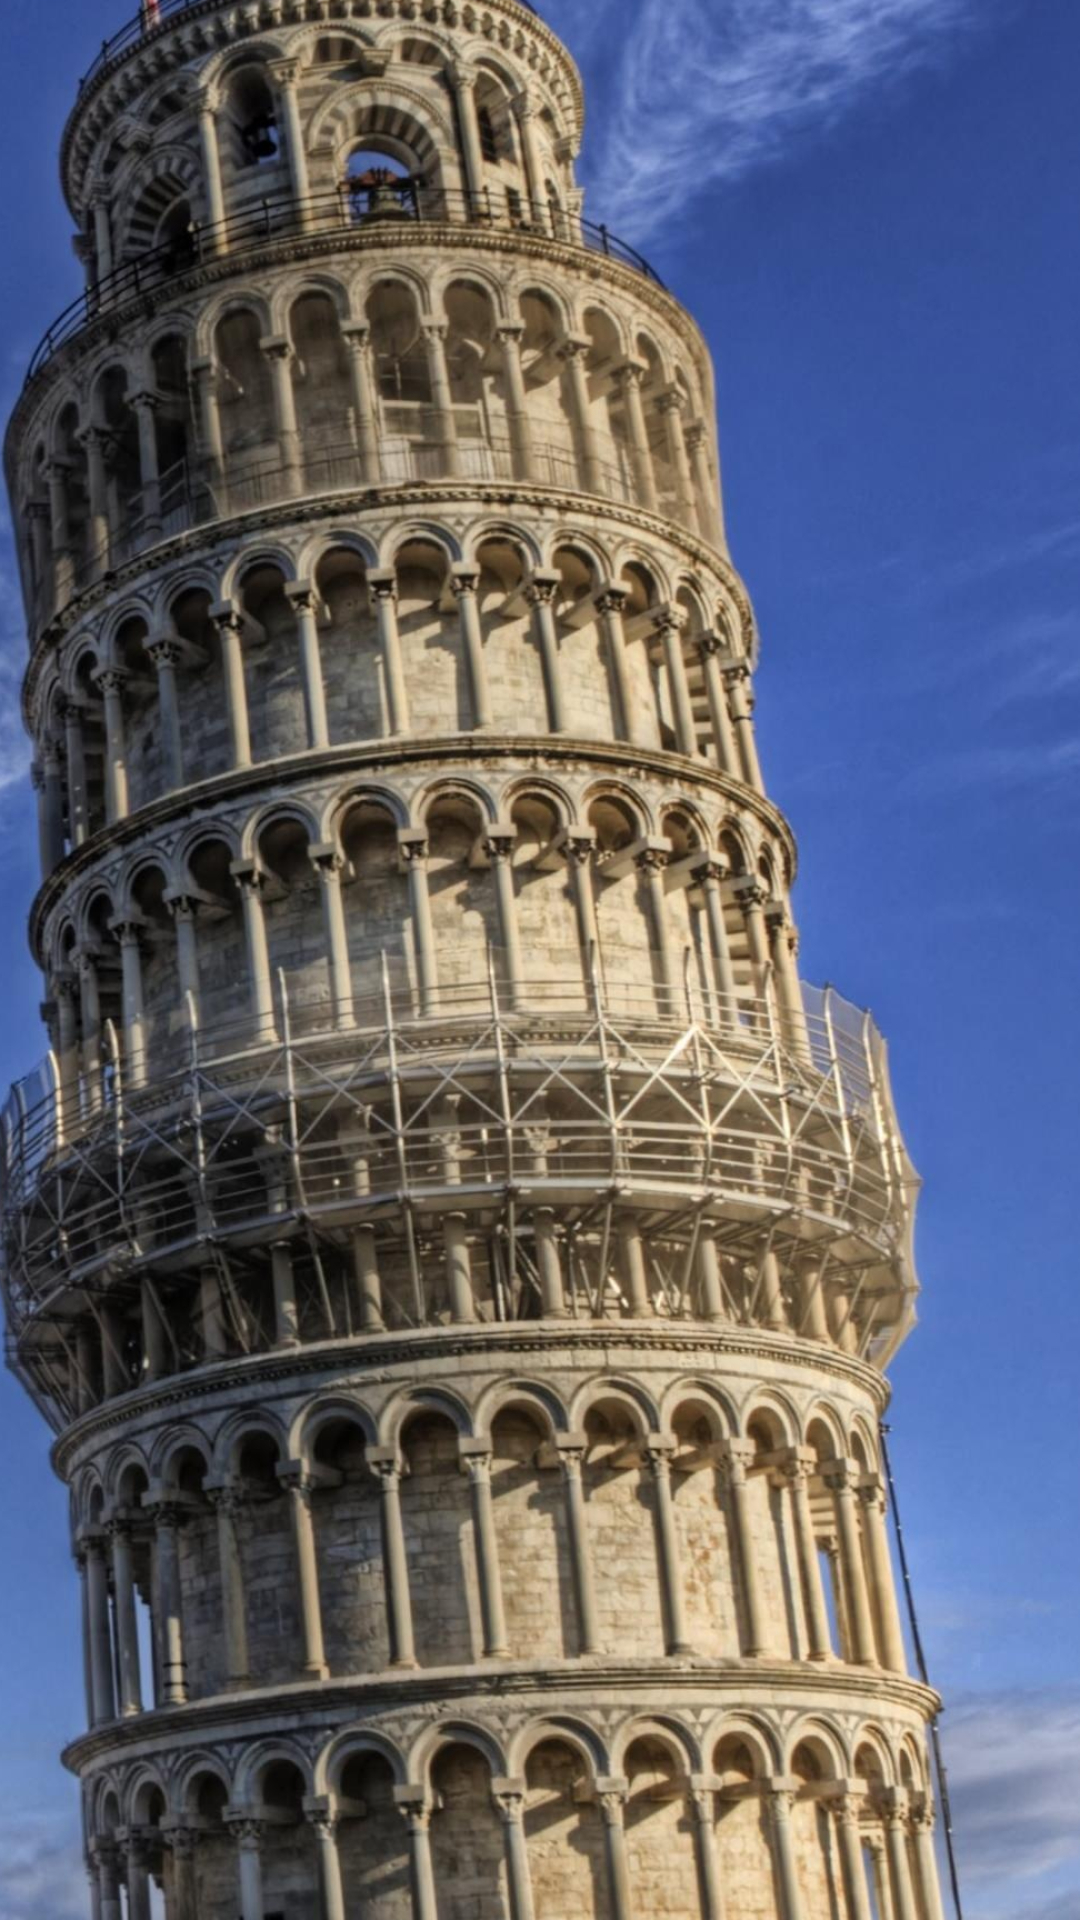 Leaning Tower wallpaper, Unique perspective, Vibrant image, Eye-catching design, 1080x1920 Full HD Handy